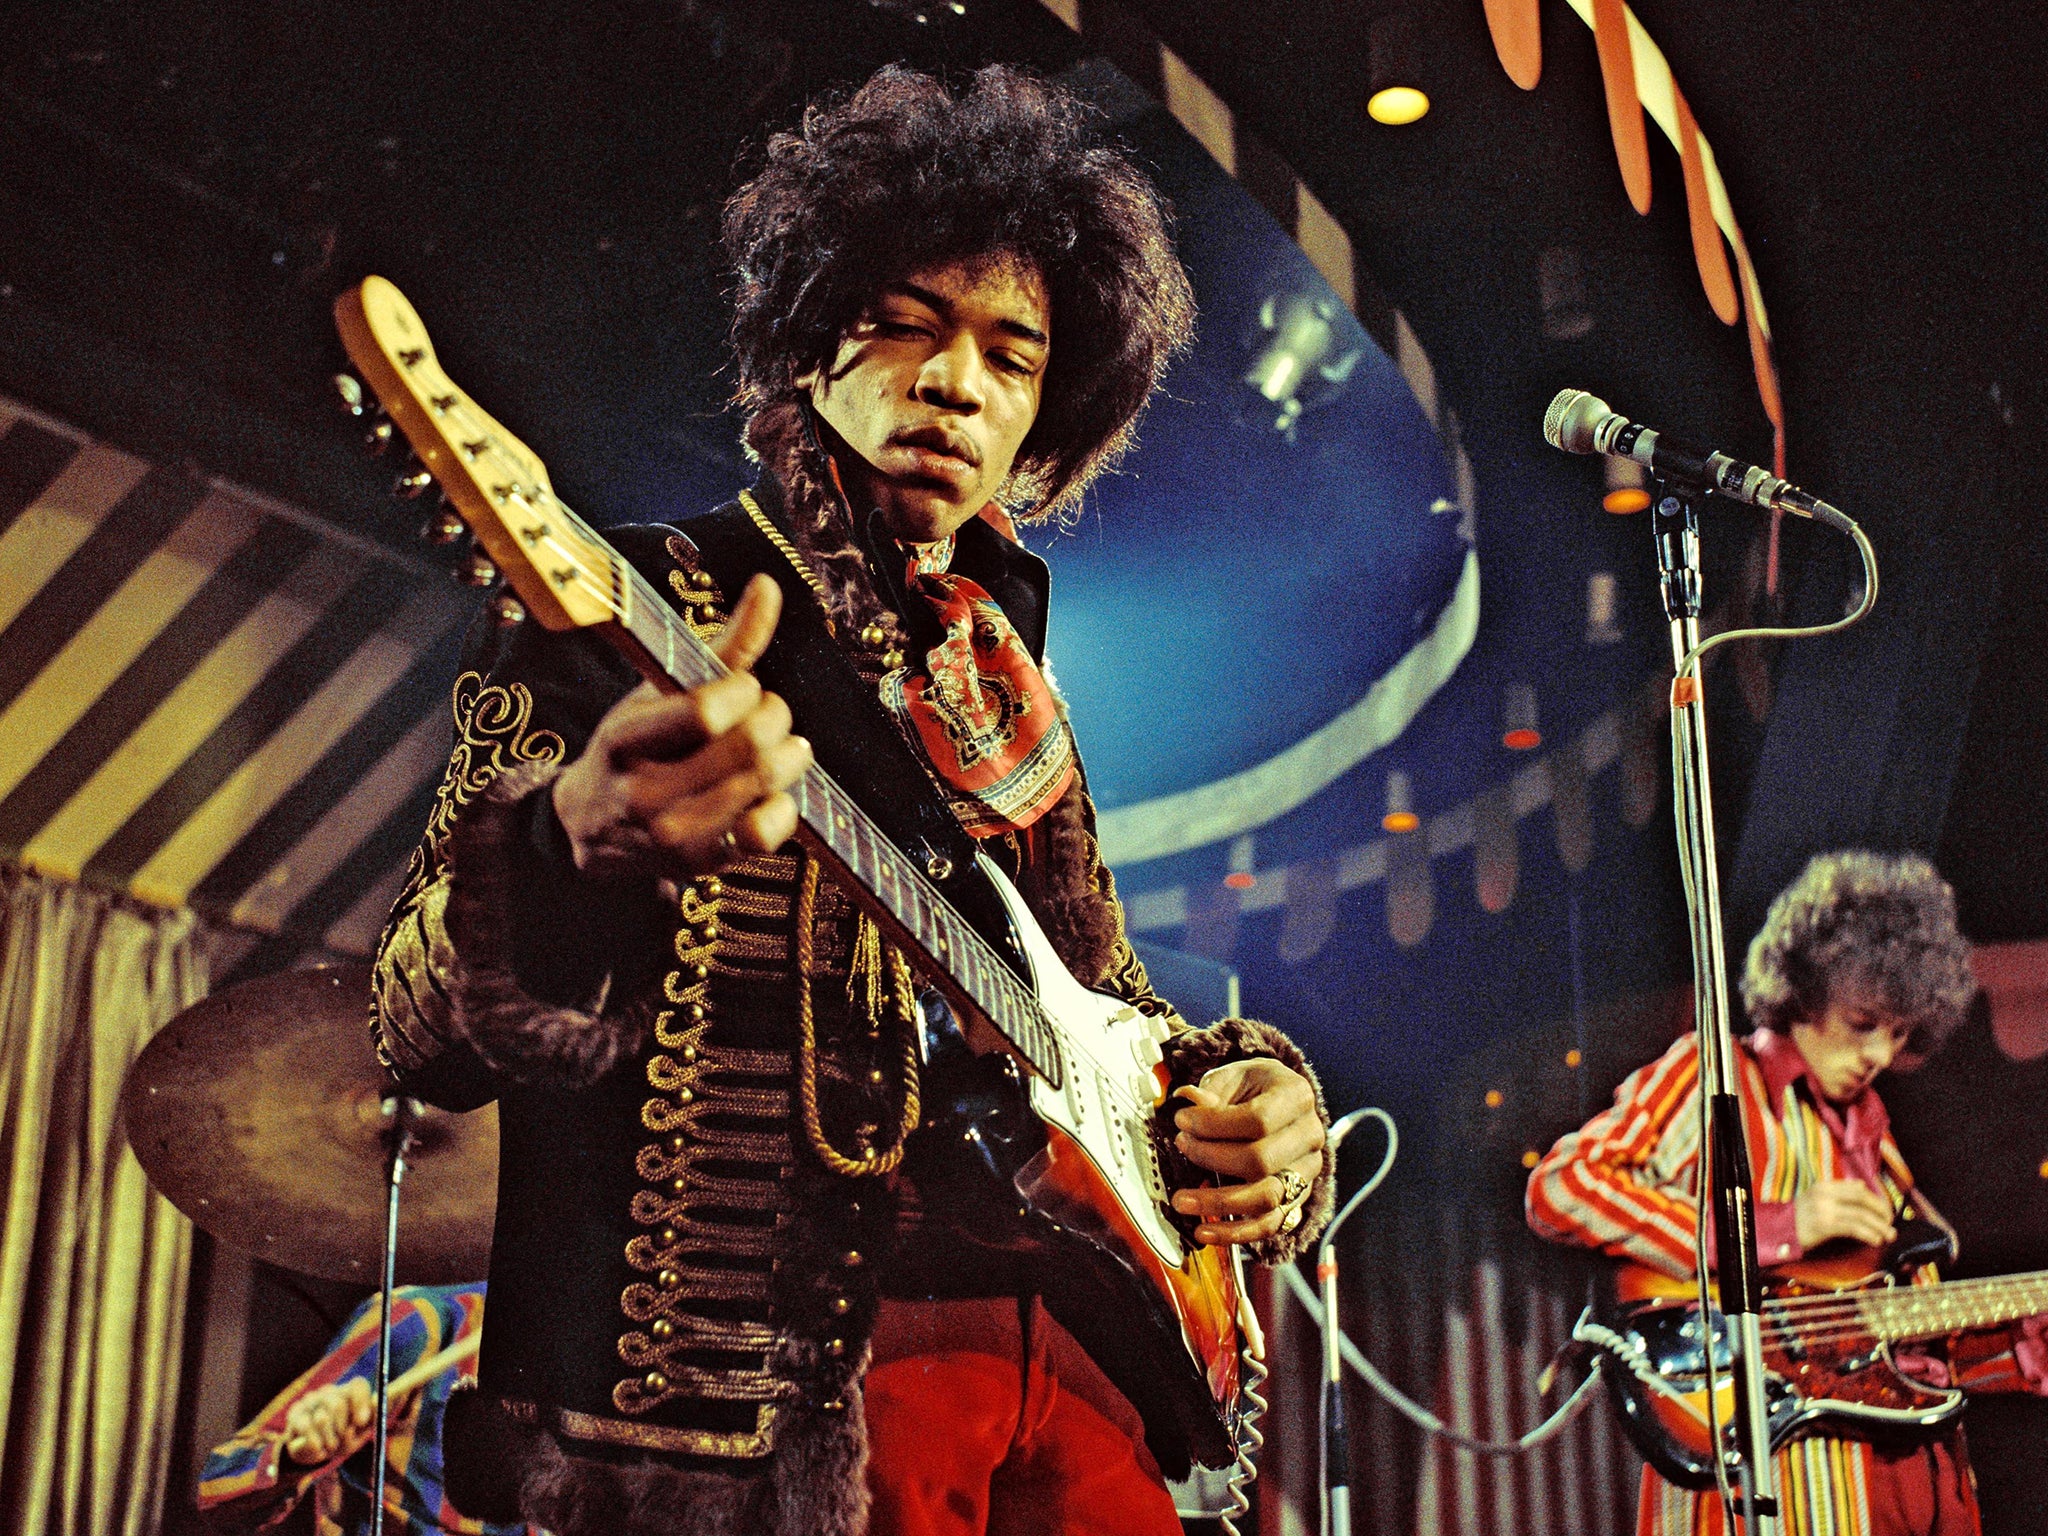 Jimi Hendrix (left) and Noel Redding play with The Jimi Hendrix Experience at the Marquee Club in London, 1967